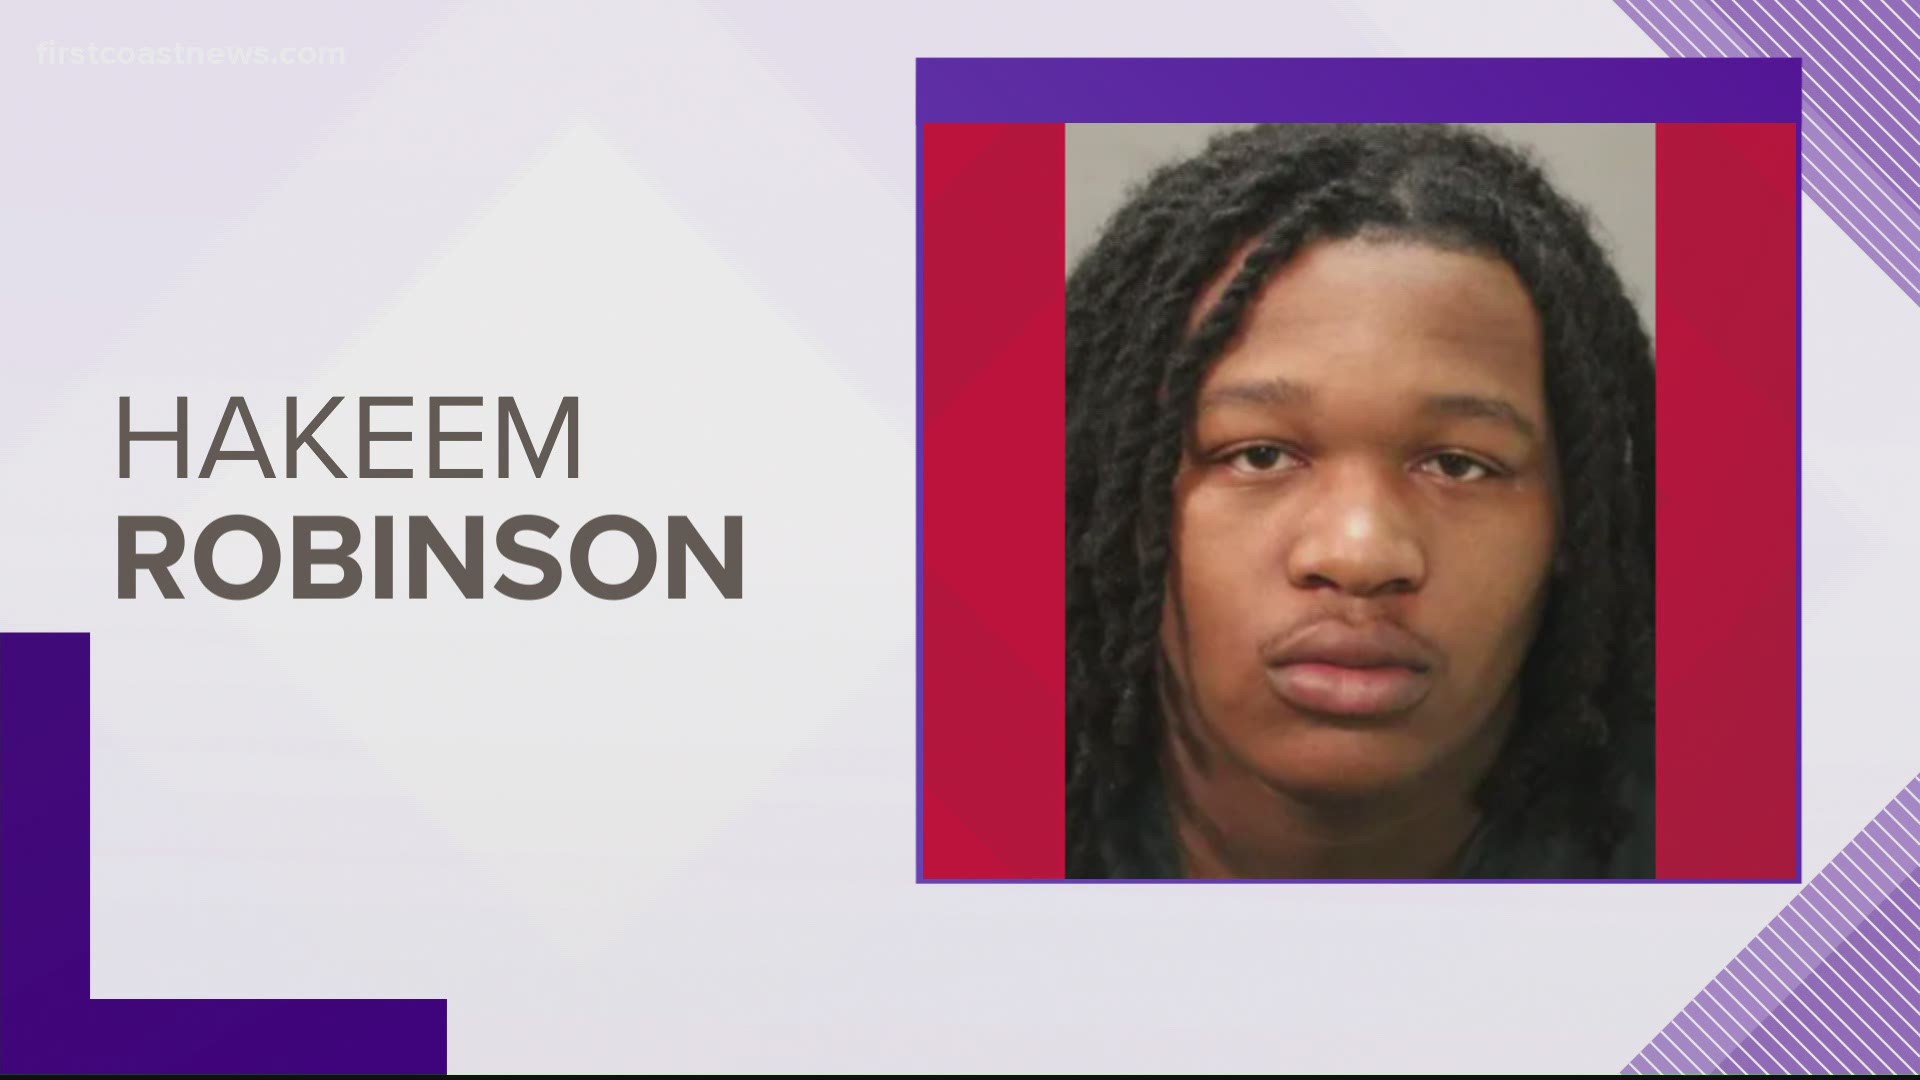 Hakeem Armani Robinson, 22, was charged on March 10 with second-degree murder in the Feb. 25, 2019 death of a 16-year-old boy.